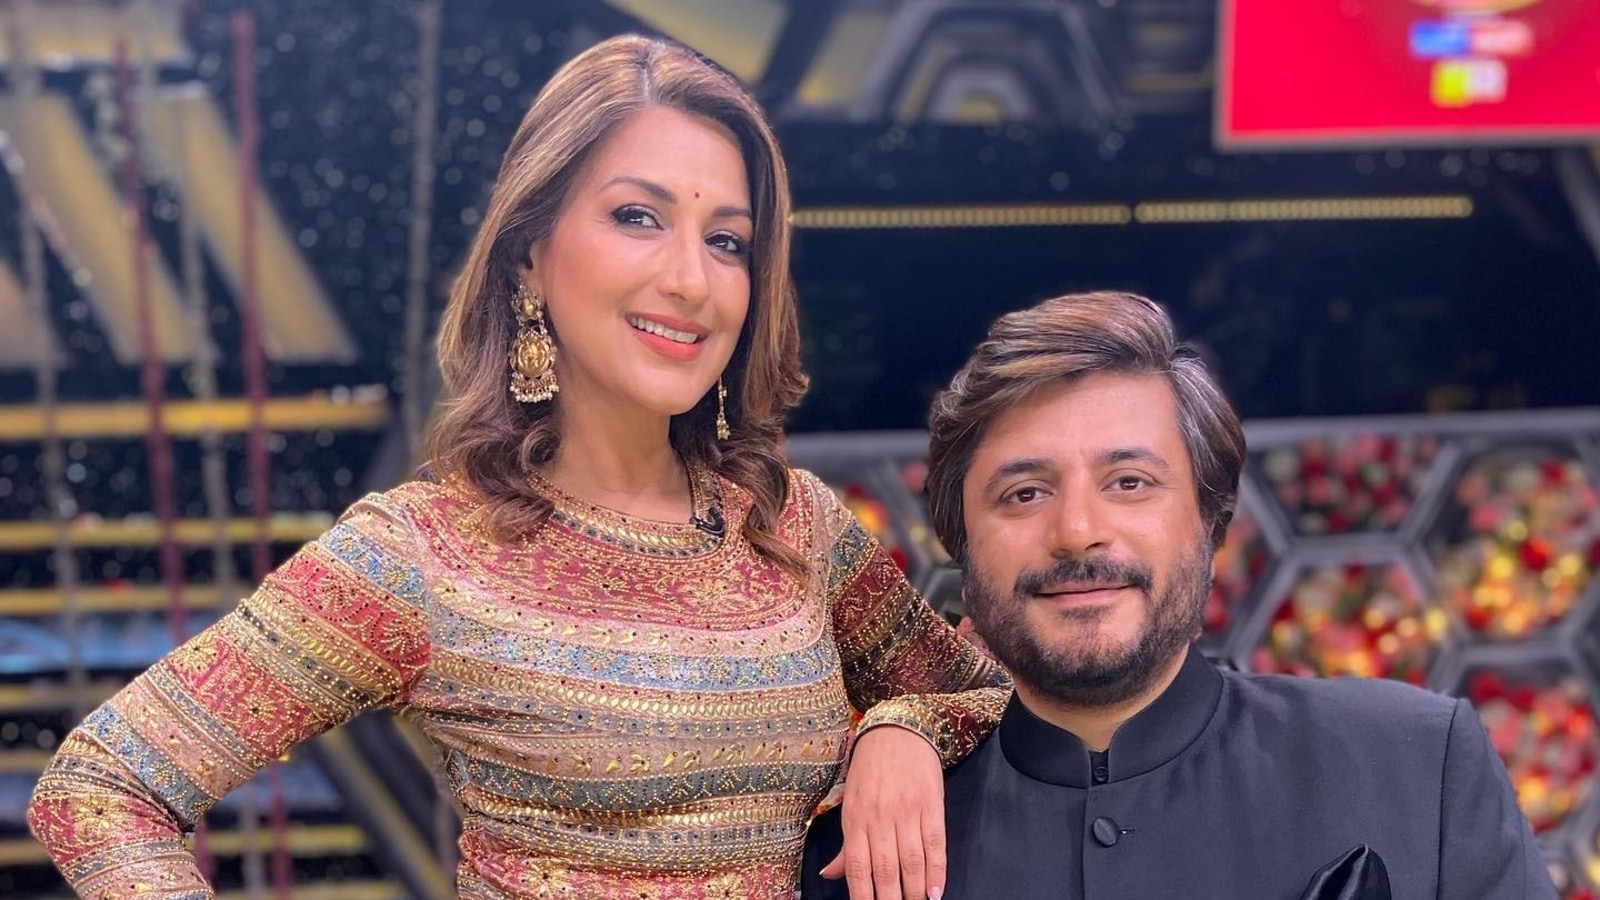 Sonali Bendre poses with Goldie Behl on ‘shaadi special’ DID Li’l Masters, calls it ‘bring your spouse to work day’